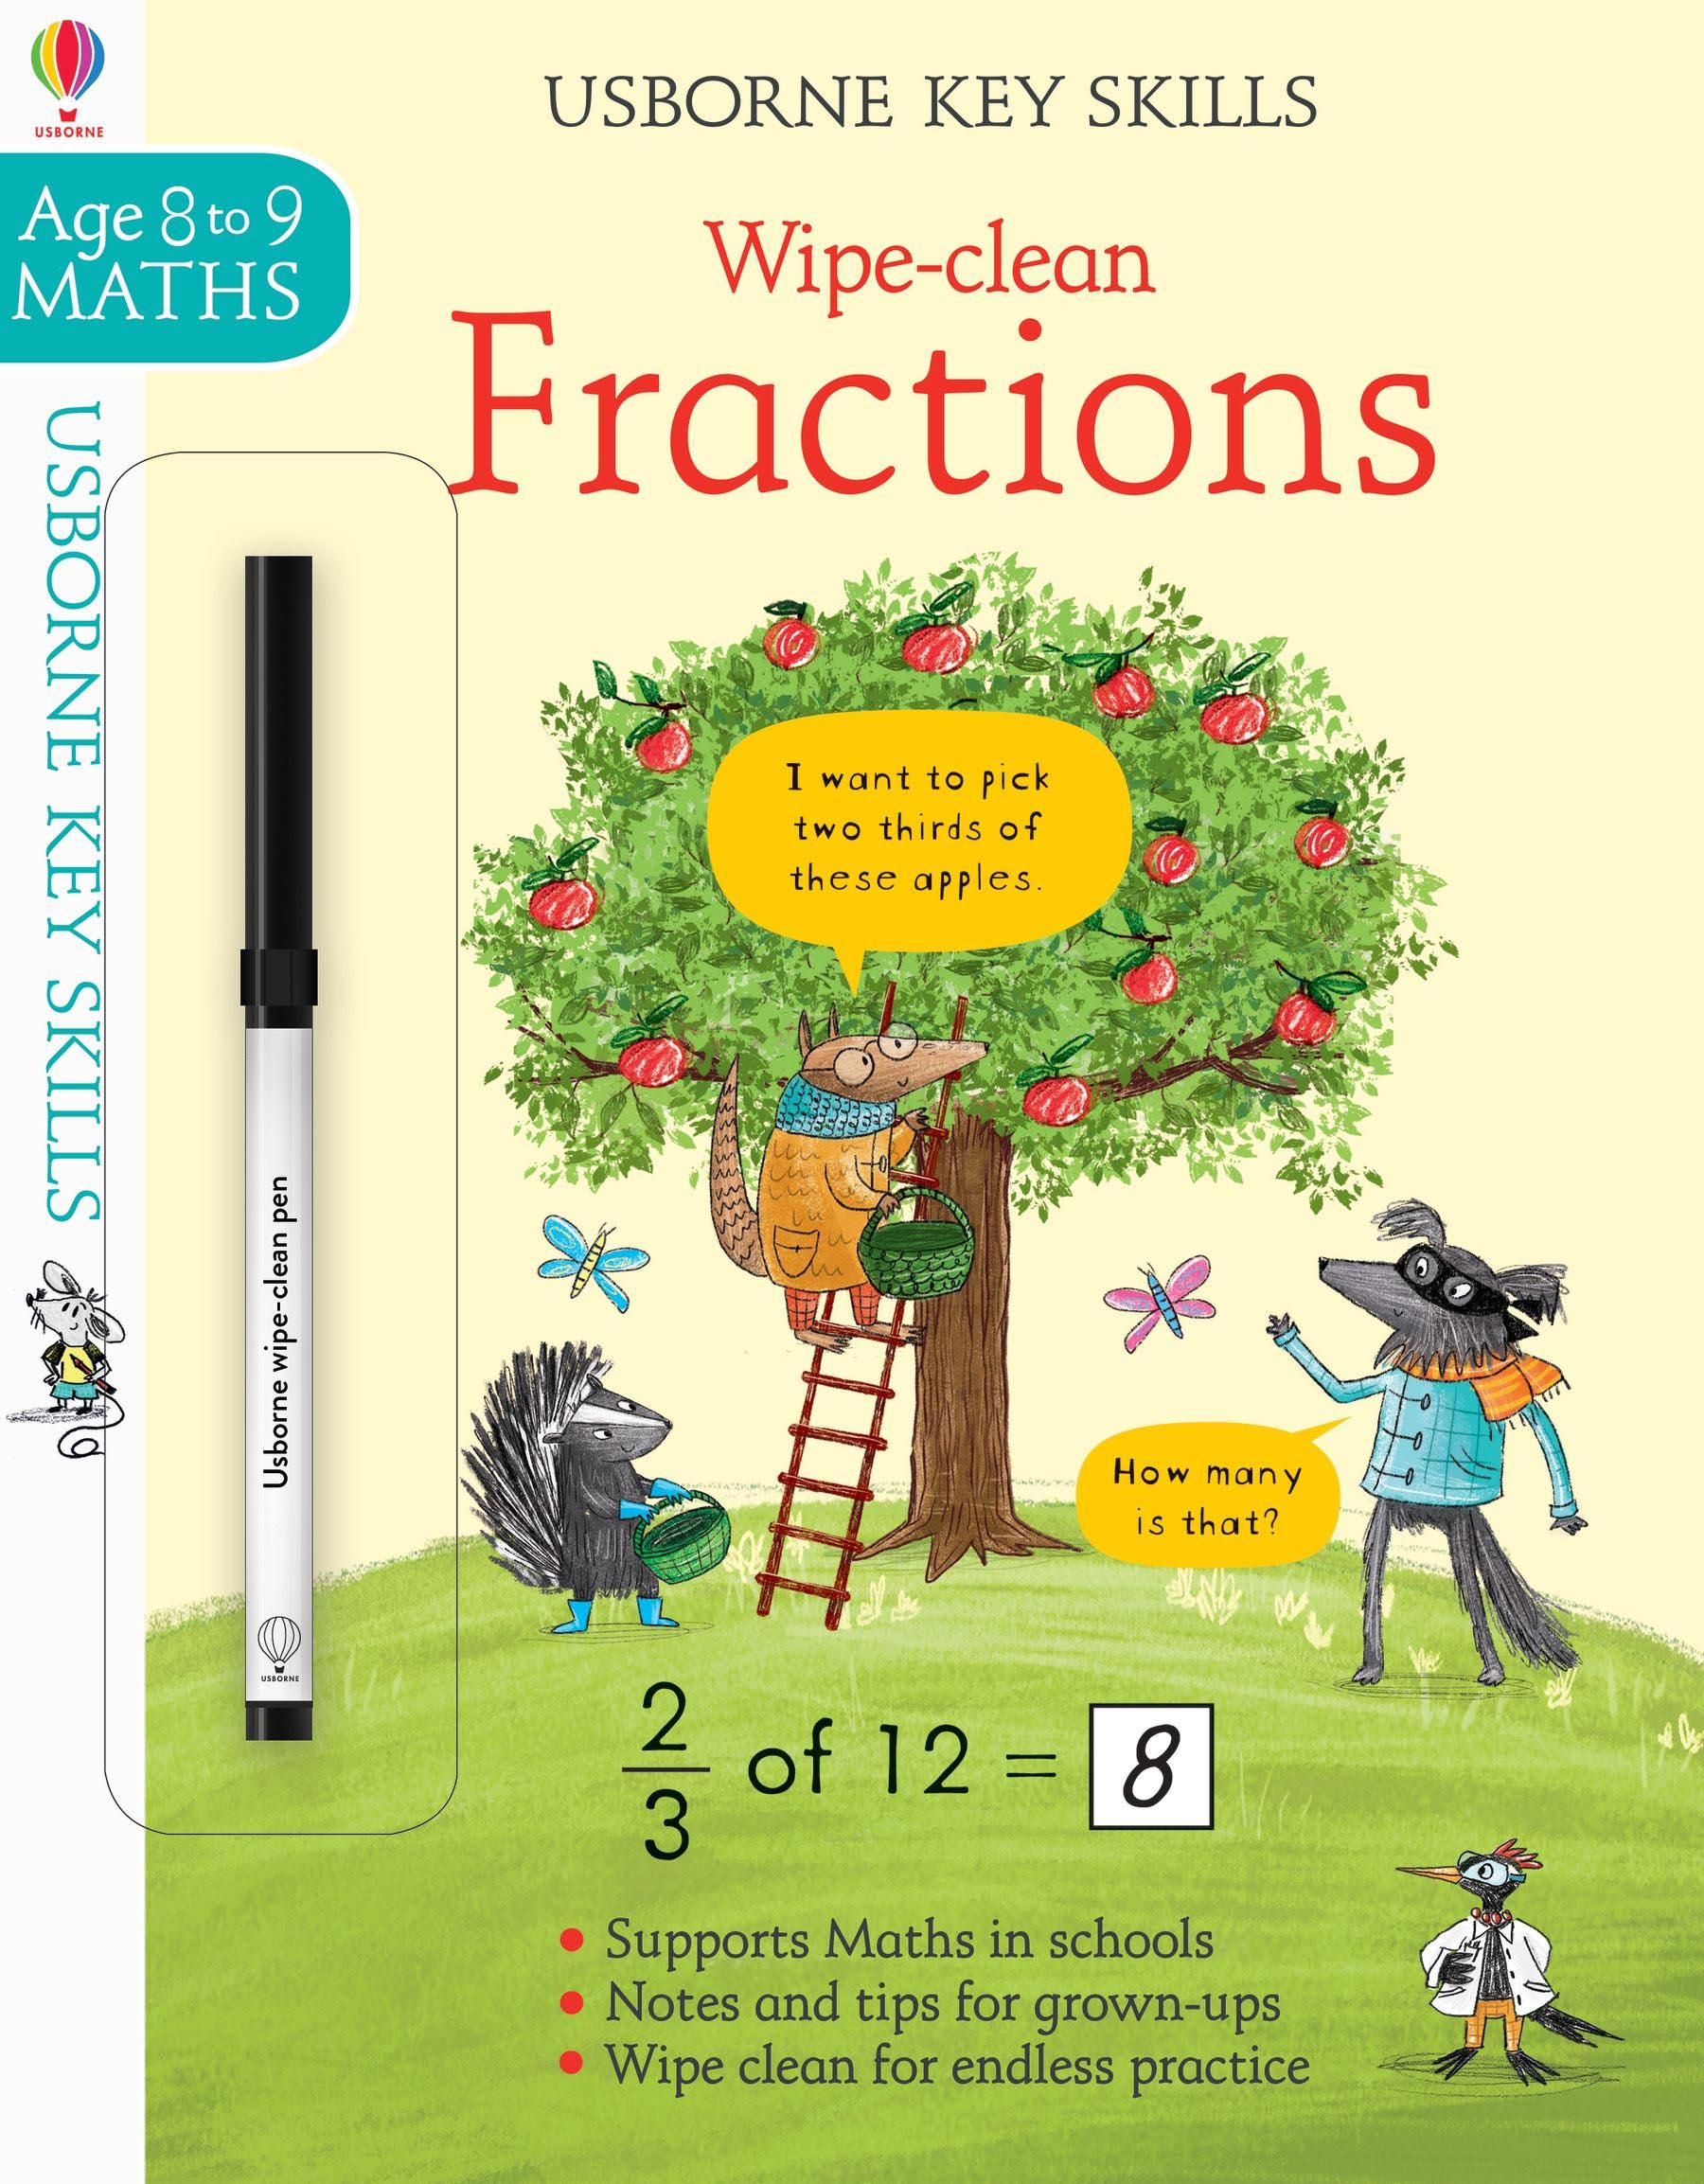 Usborne Key Skills Wipe clean Fractions (Age 8 to 9 Maths)